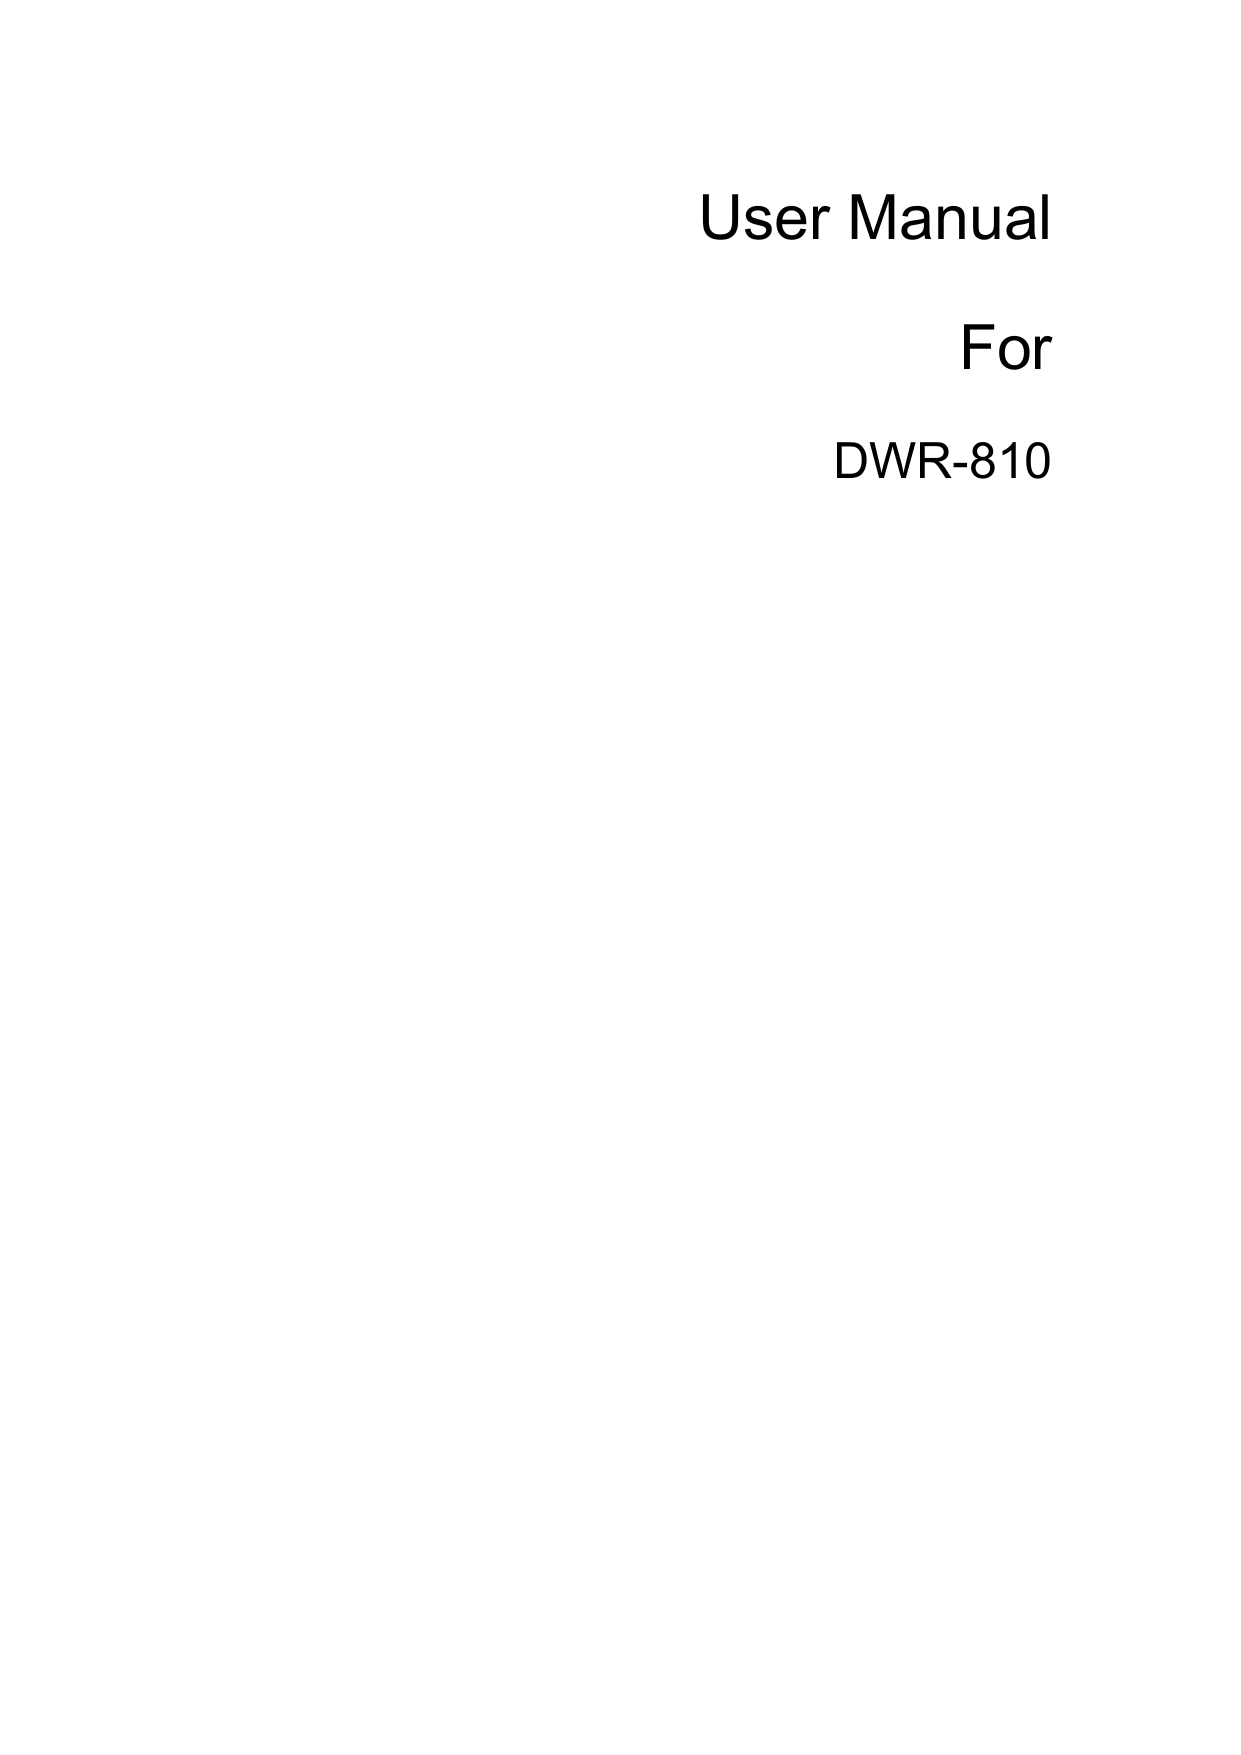 User Manual For DWR-810   